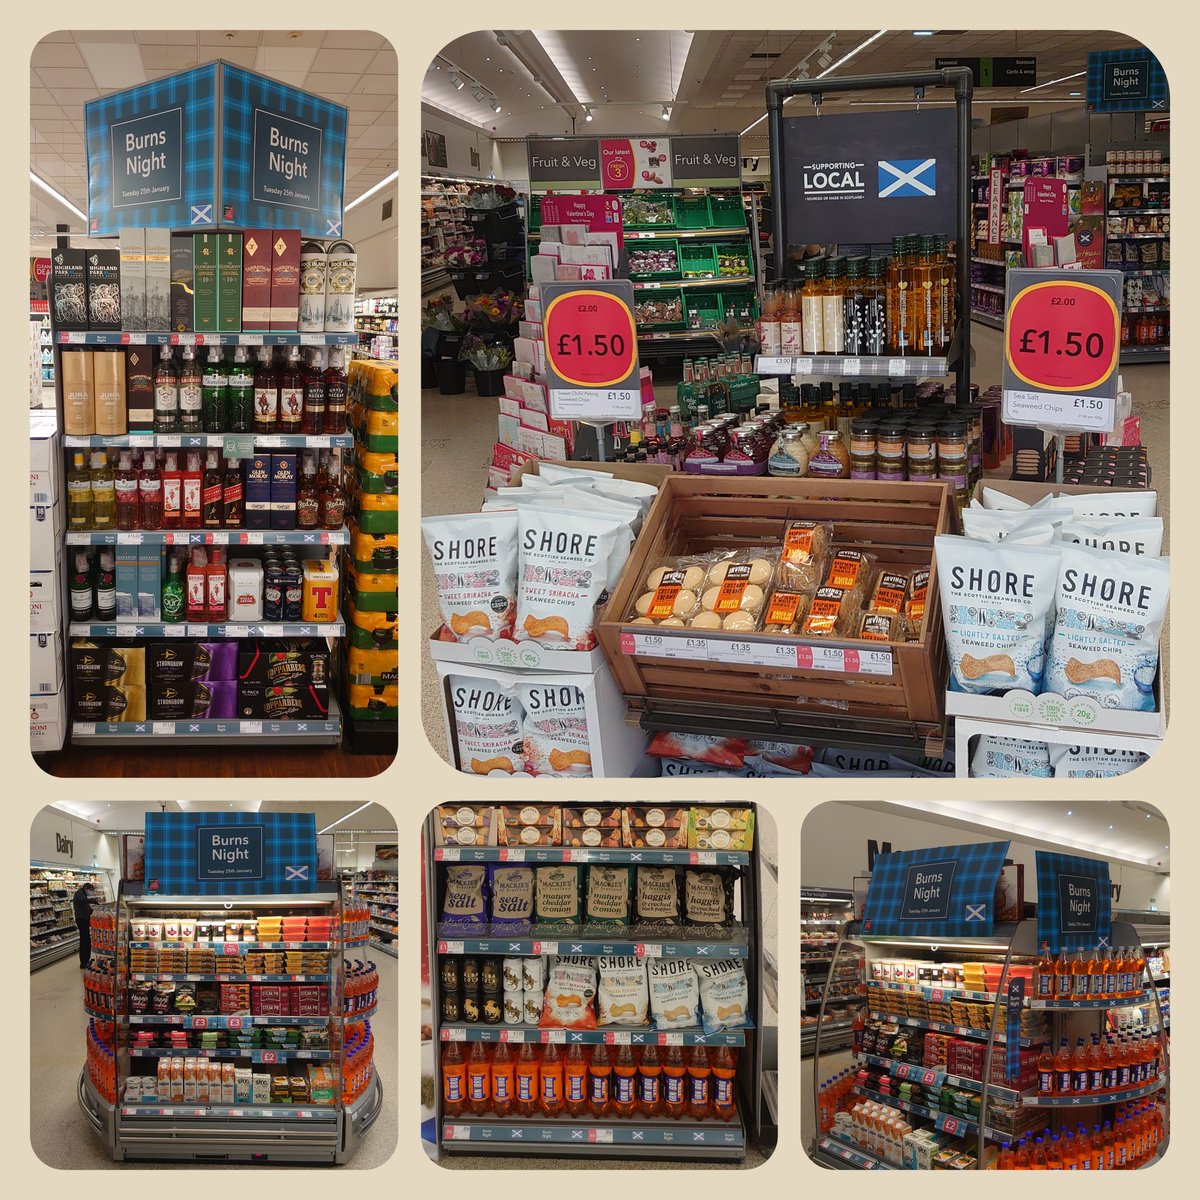 What a fantastic range of local Scottish products available at @coopuk for Burns Night at some cracking prices too! @KevinBuchanCoOp @PaulThomson3231 #itswhatwedo